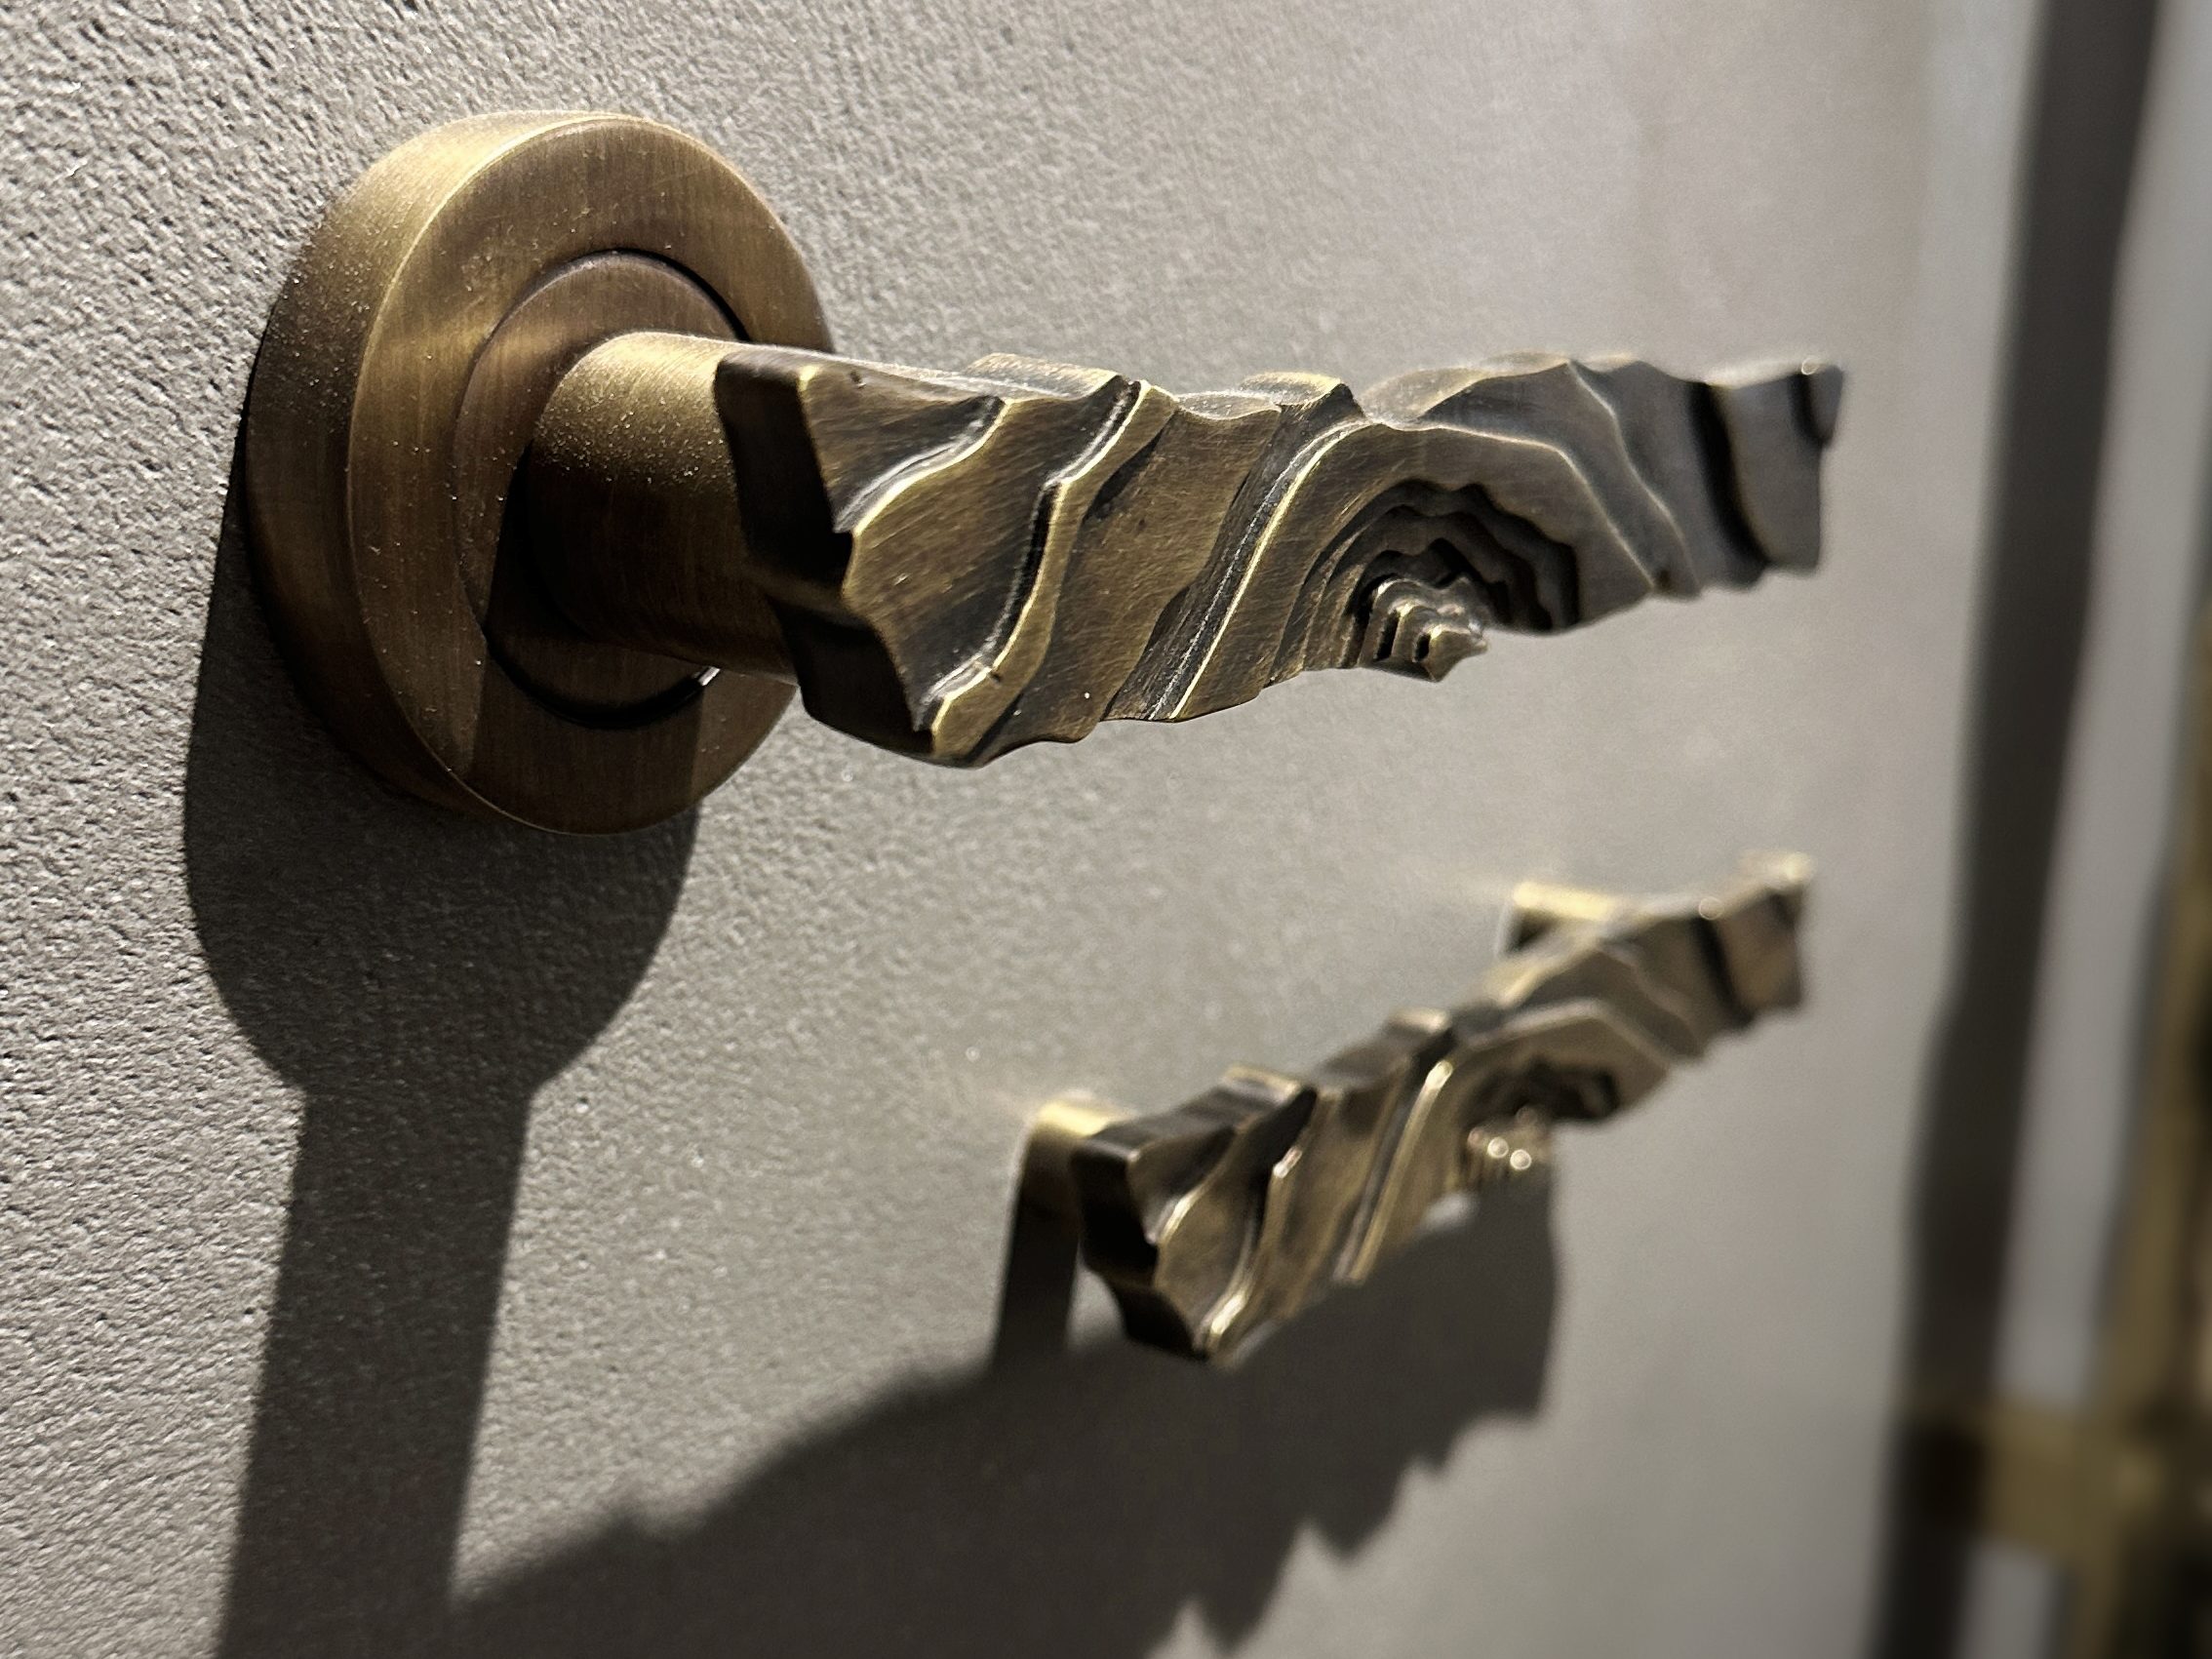 SEARCHING FOR THE ULTIMATE IN LUXURY HARDWARE? VISIT US AT SALONE DEL MOBILE